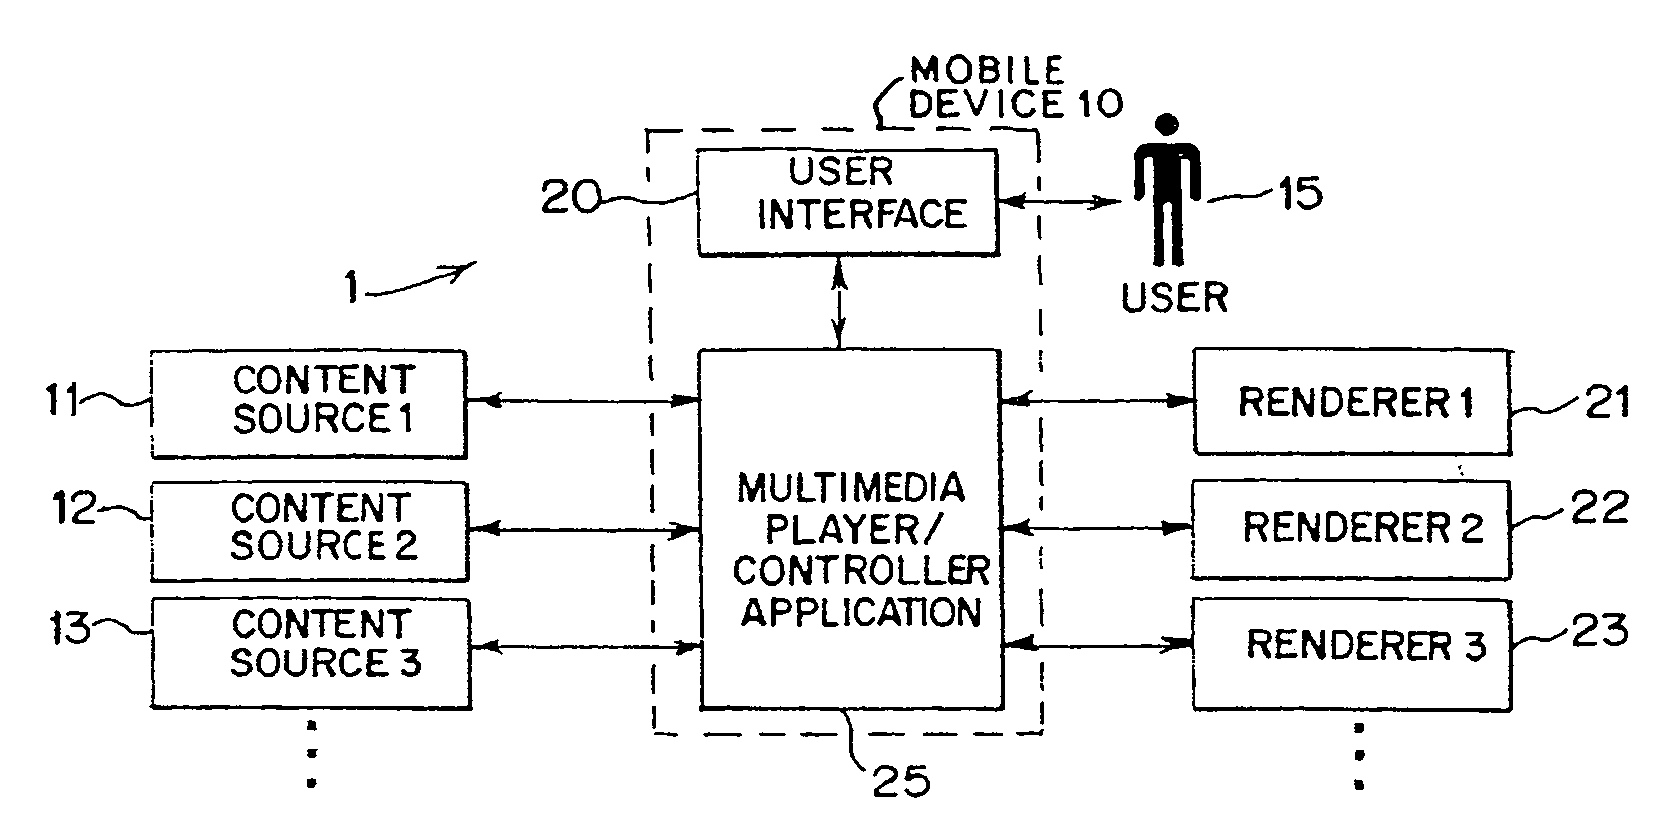 System and method for browsing, selecting and/or controlling rendering of media with a mobile device